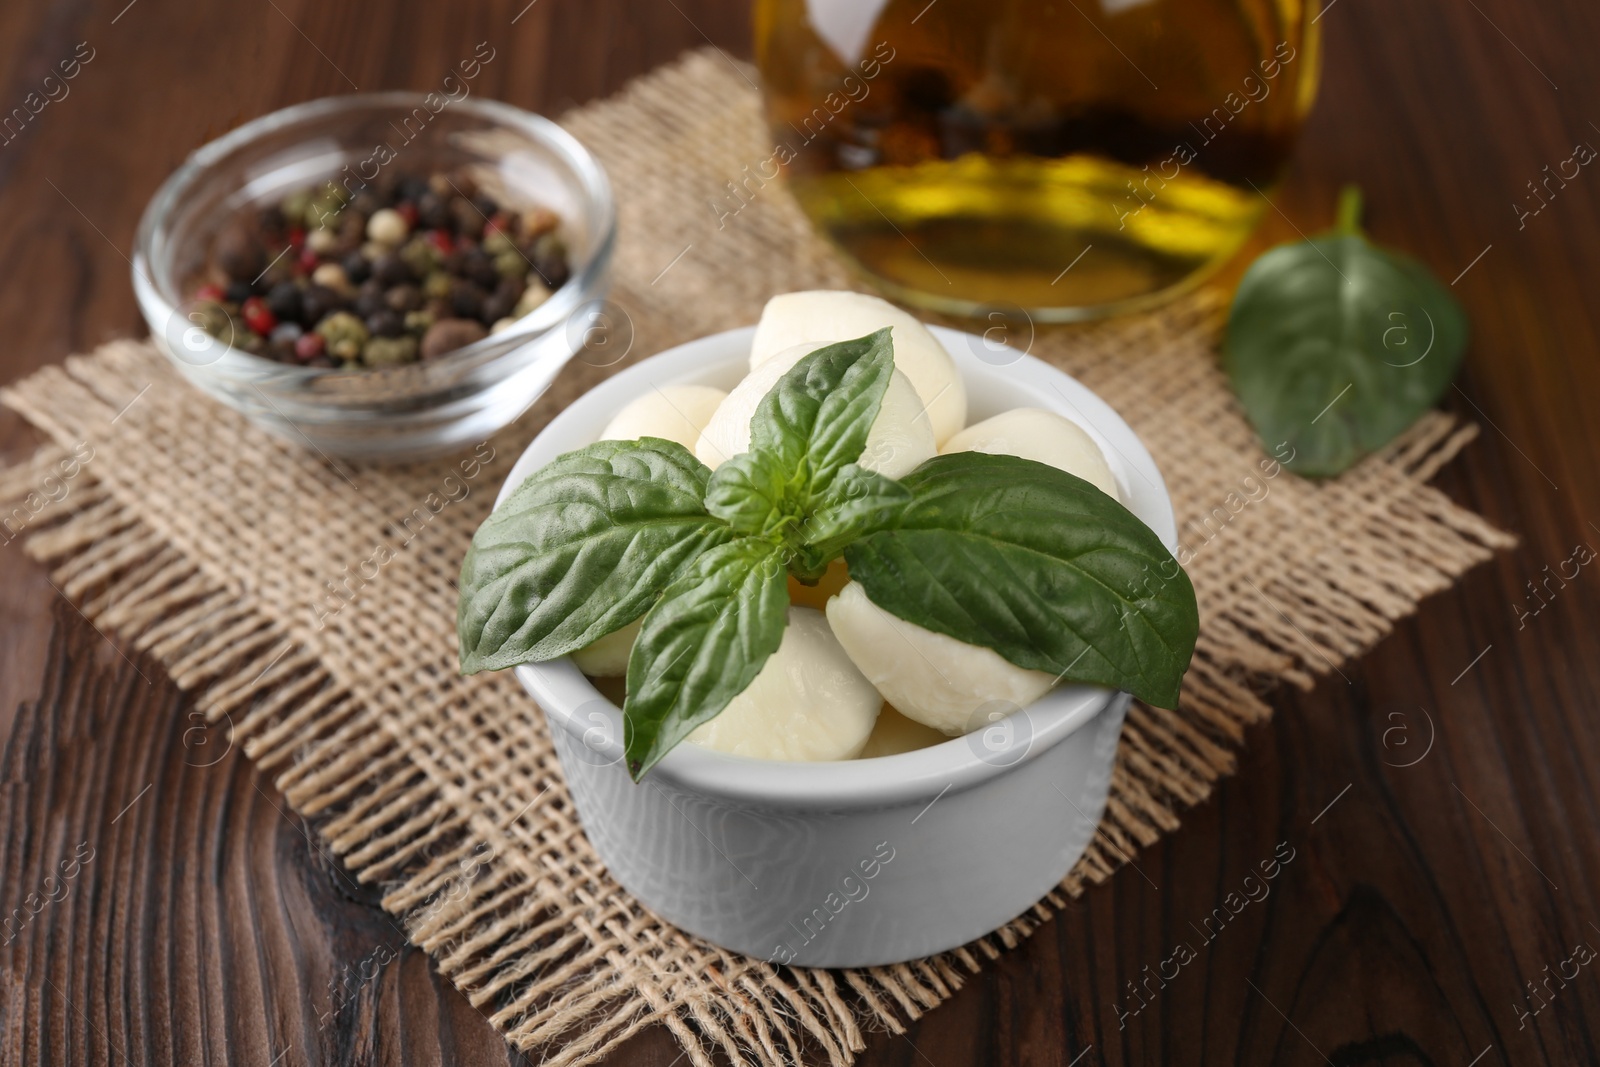 Photo of Tasty mozarella balls and basil leaves in bowl on wooden table, closeup